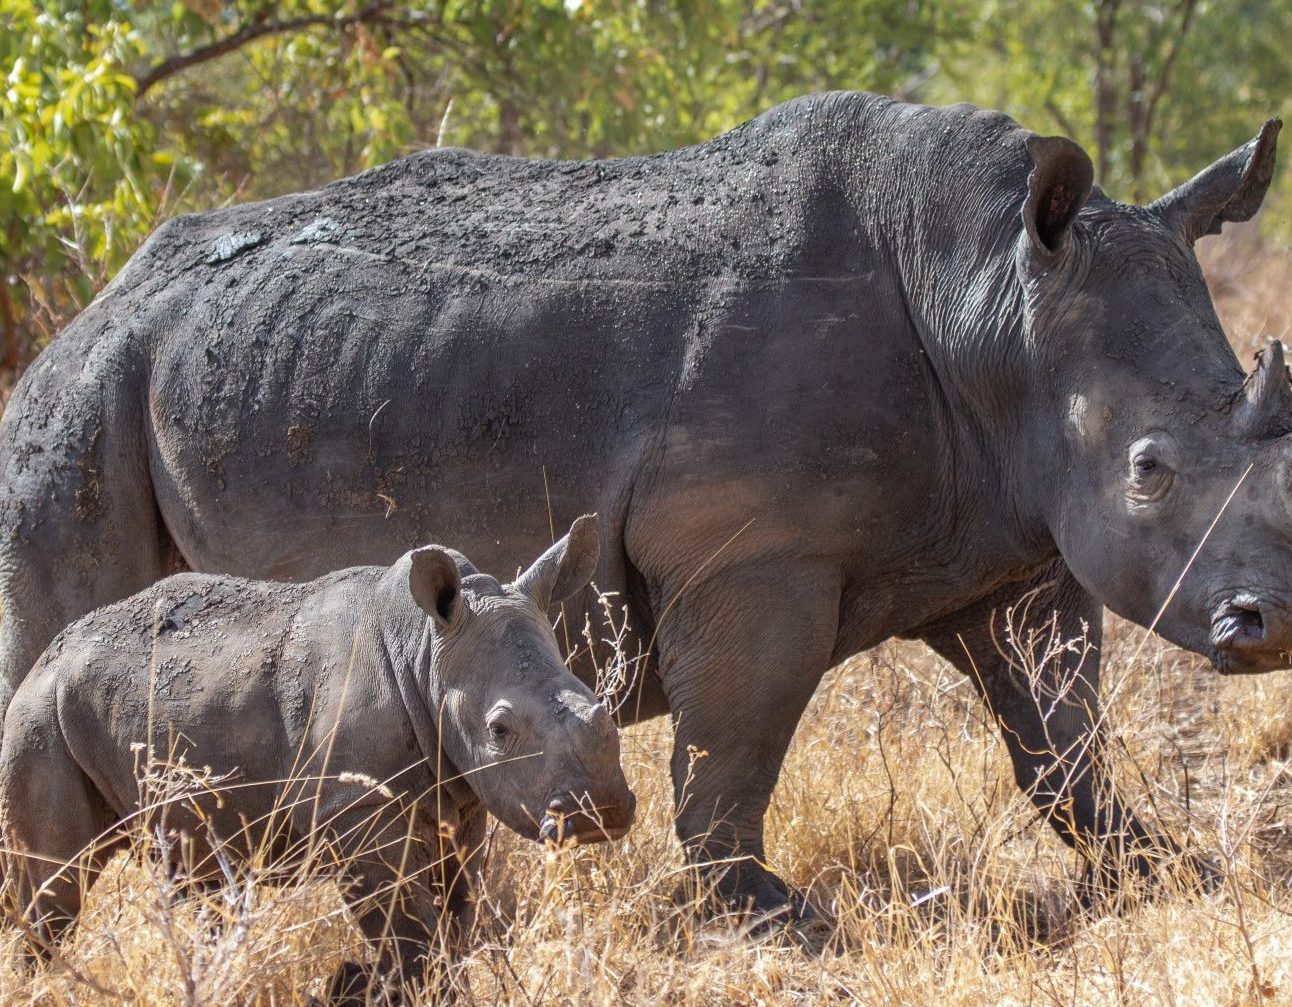 A mother rhino and calf standing together in the African bush